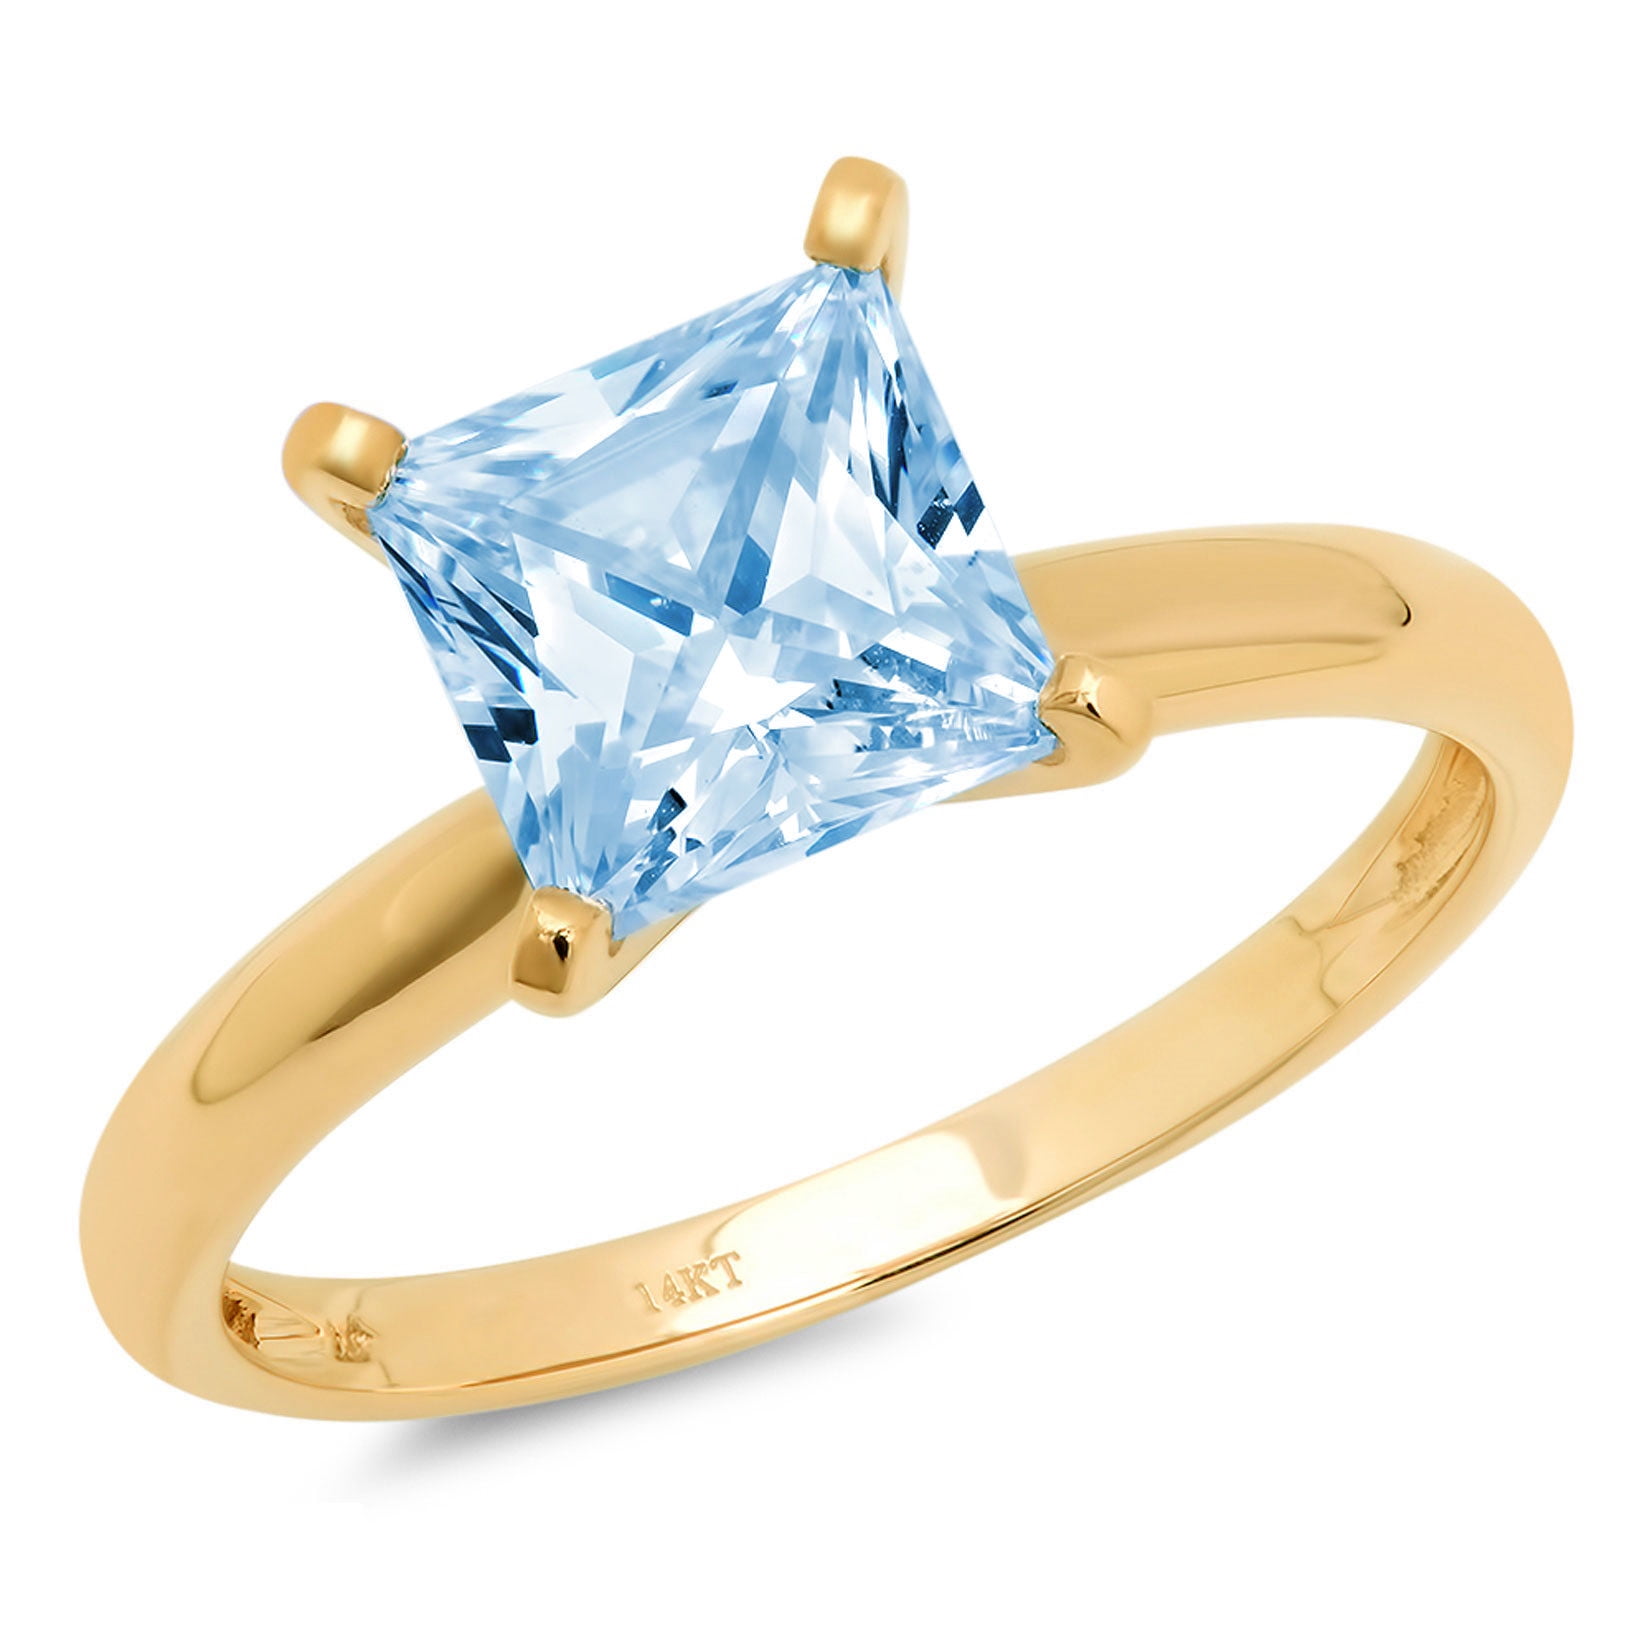 1.5 ct Brilliant Cushion Cut VVS1 Natural London Blue Topaz Yellow Solid 14k or 18k Gold Robotic Laser Engraved Handmade Solitaire Ring